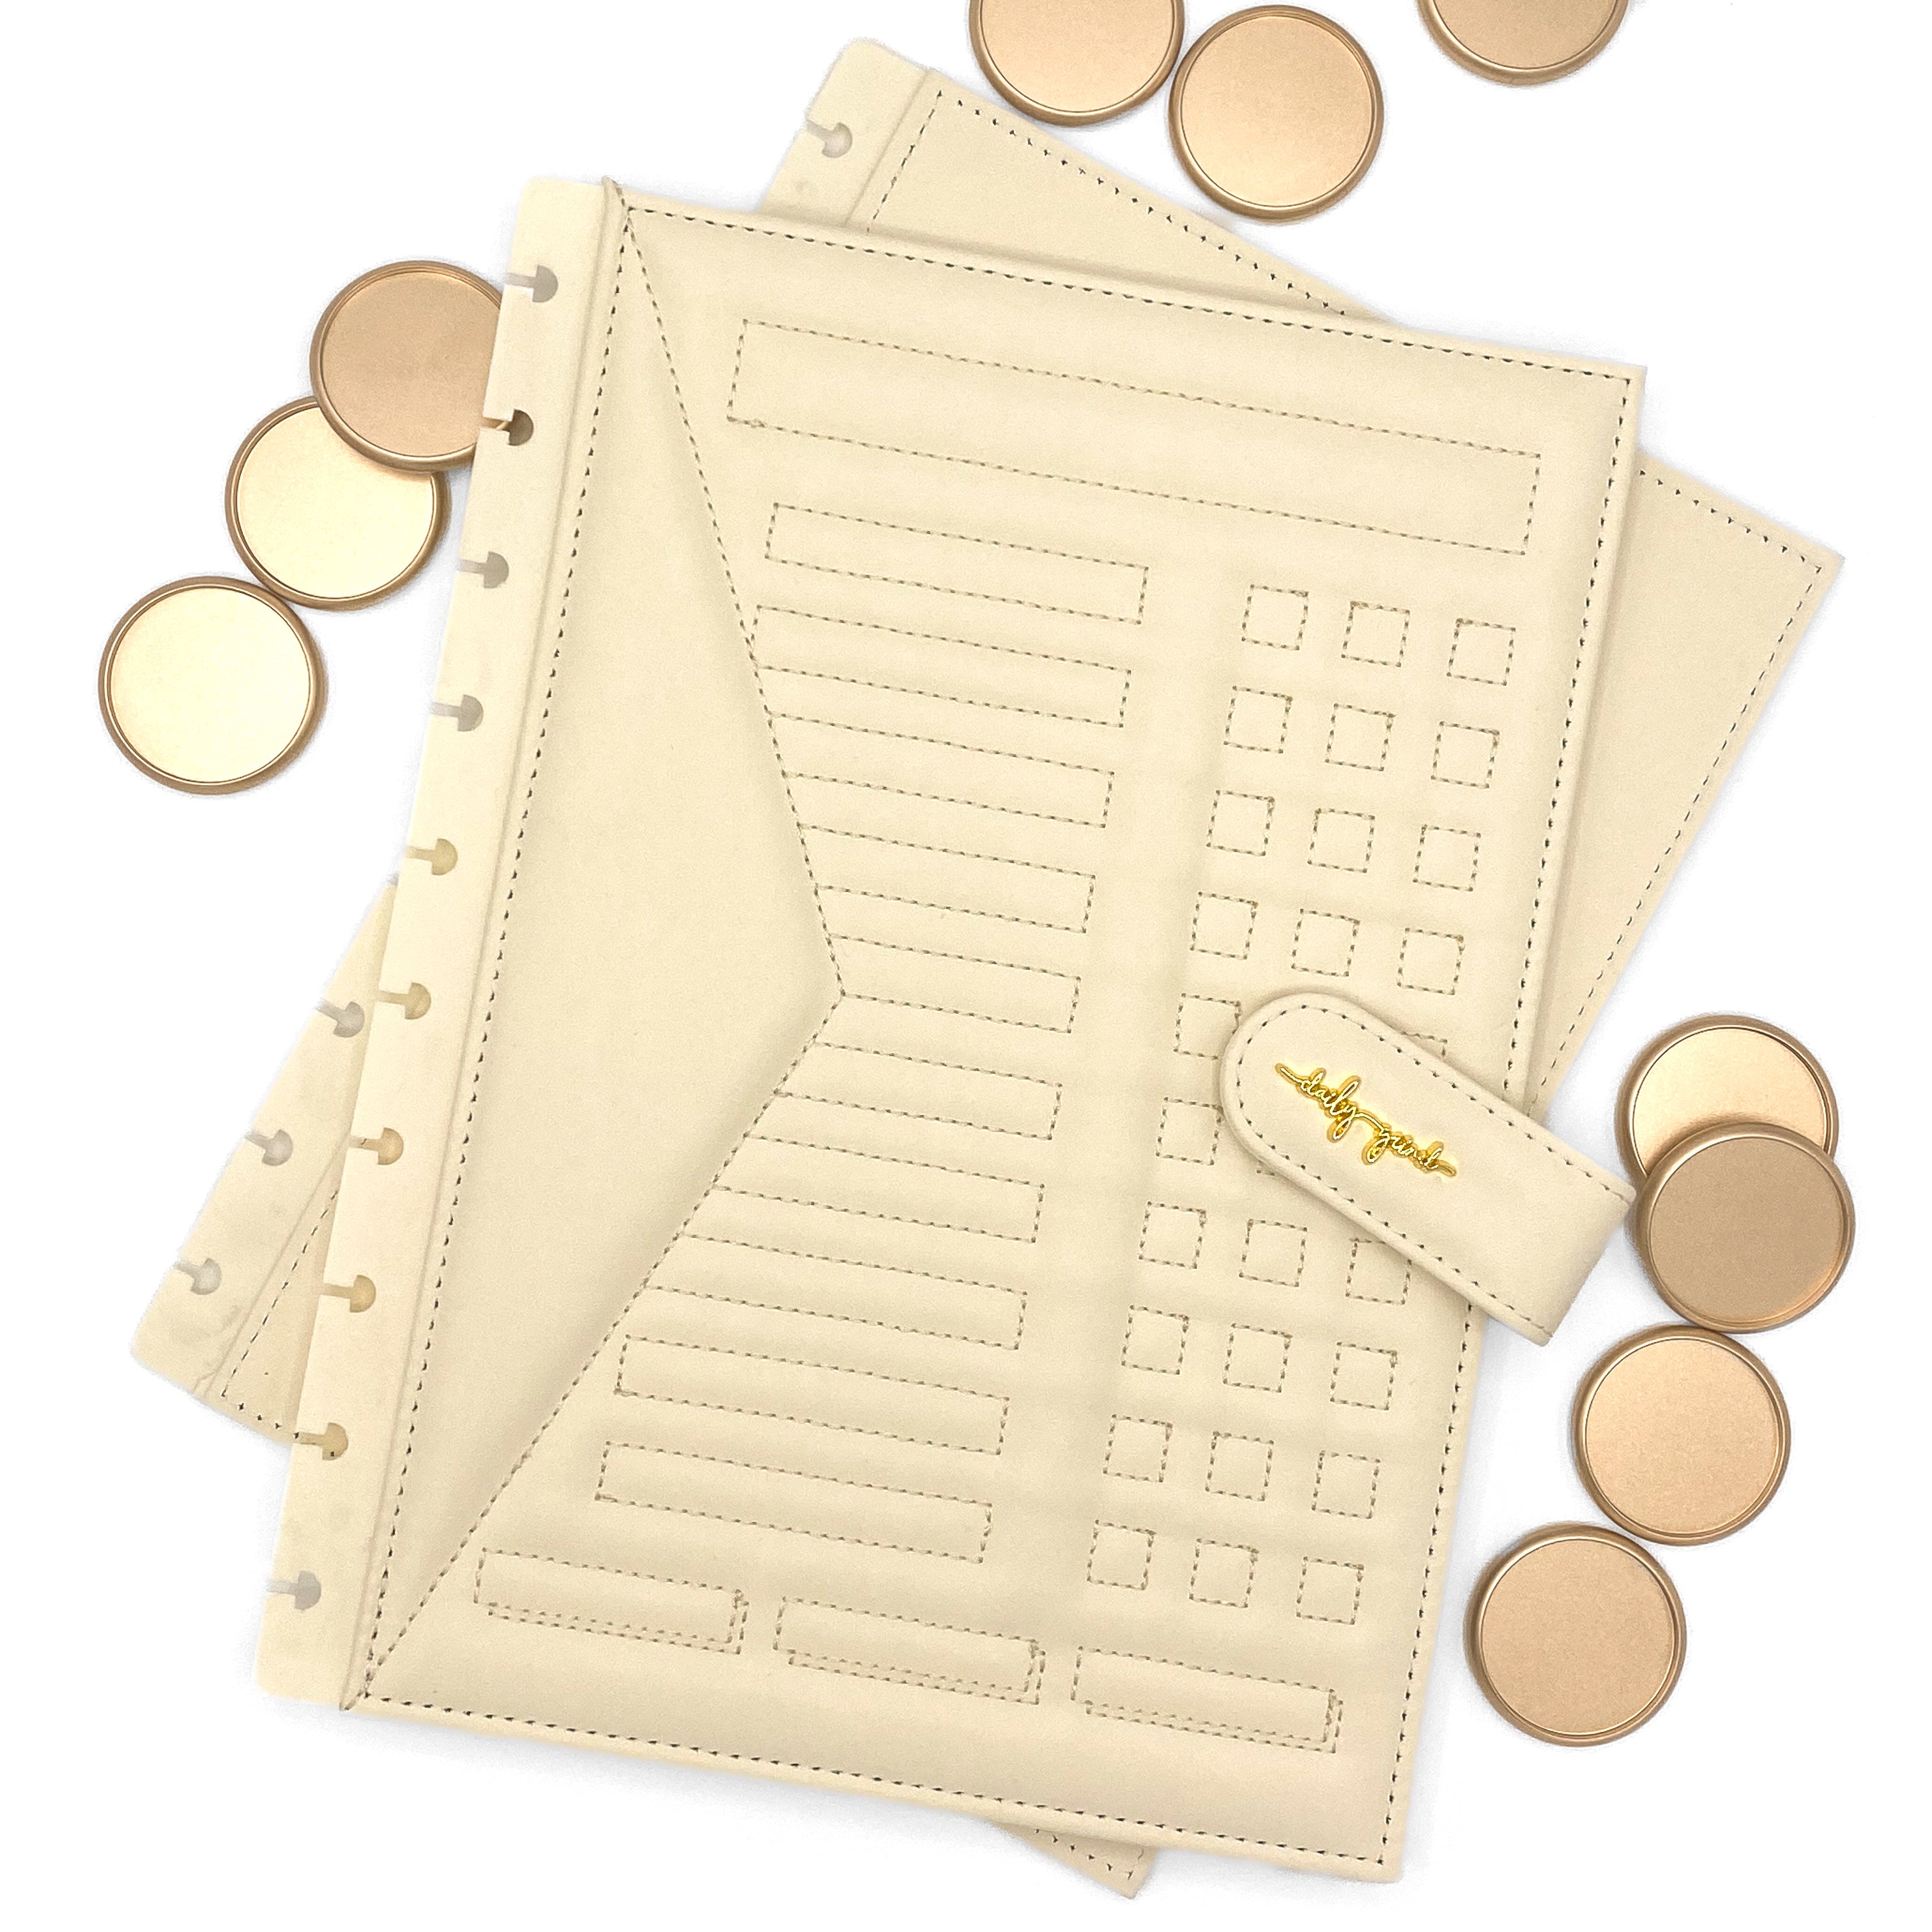 Cream faux leather planner covers and gold discs